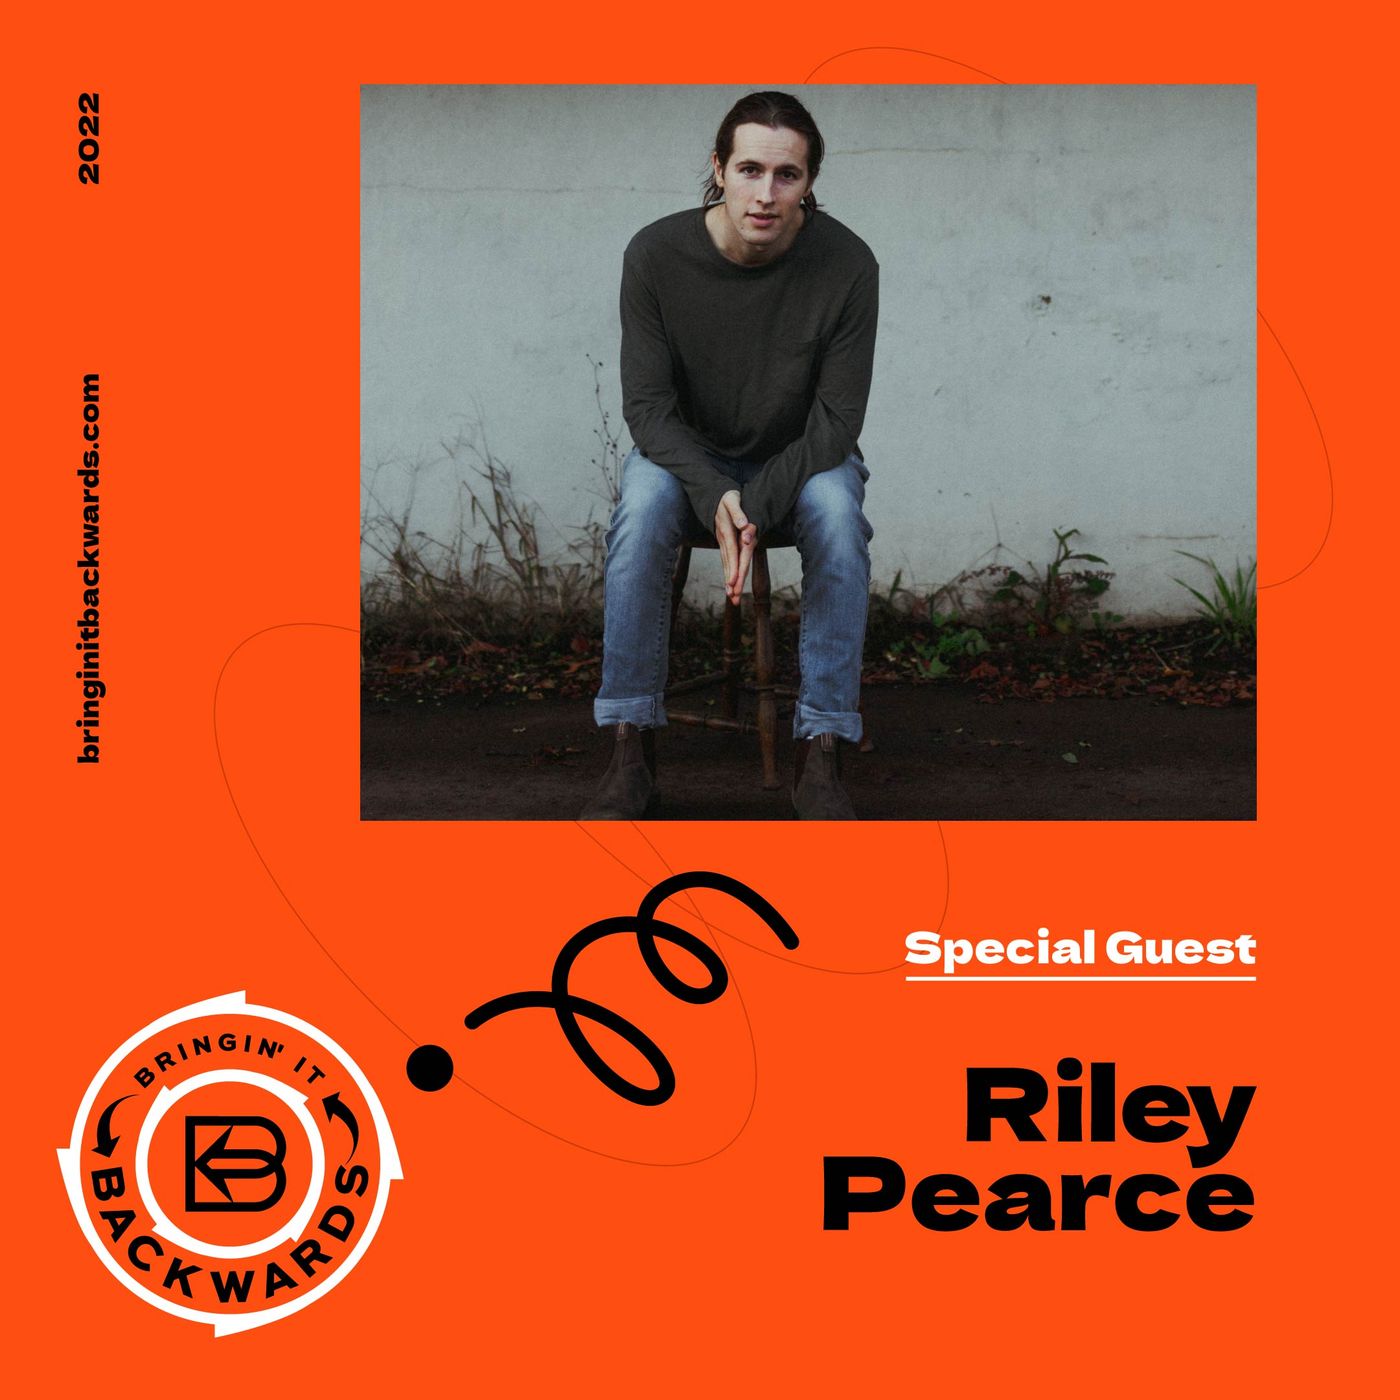 Interview with Riley Pearce